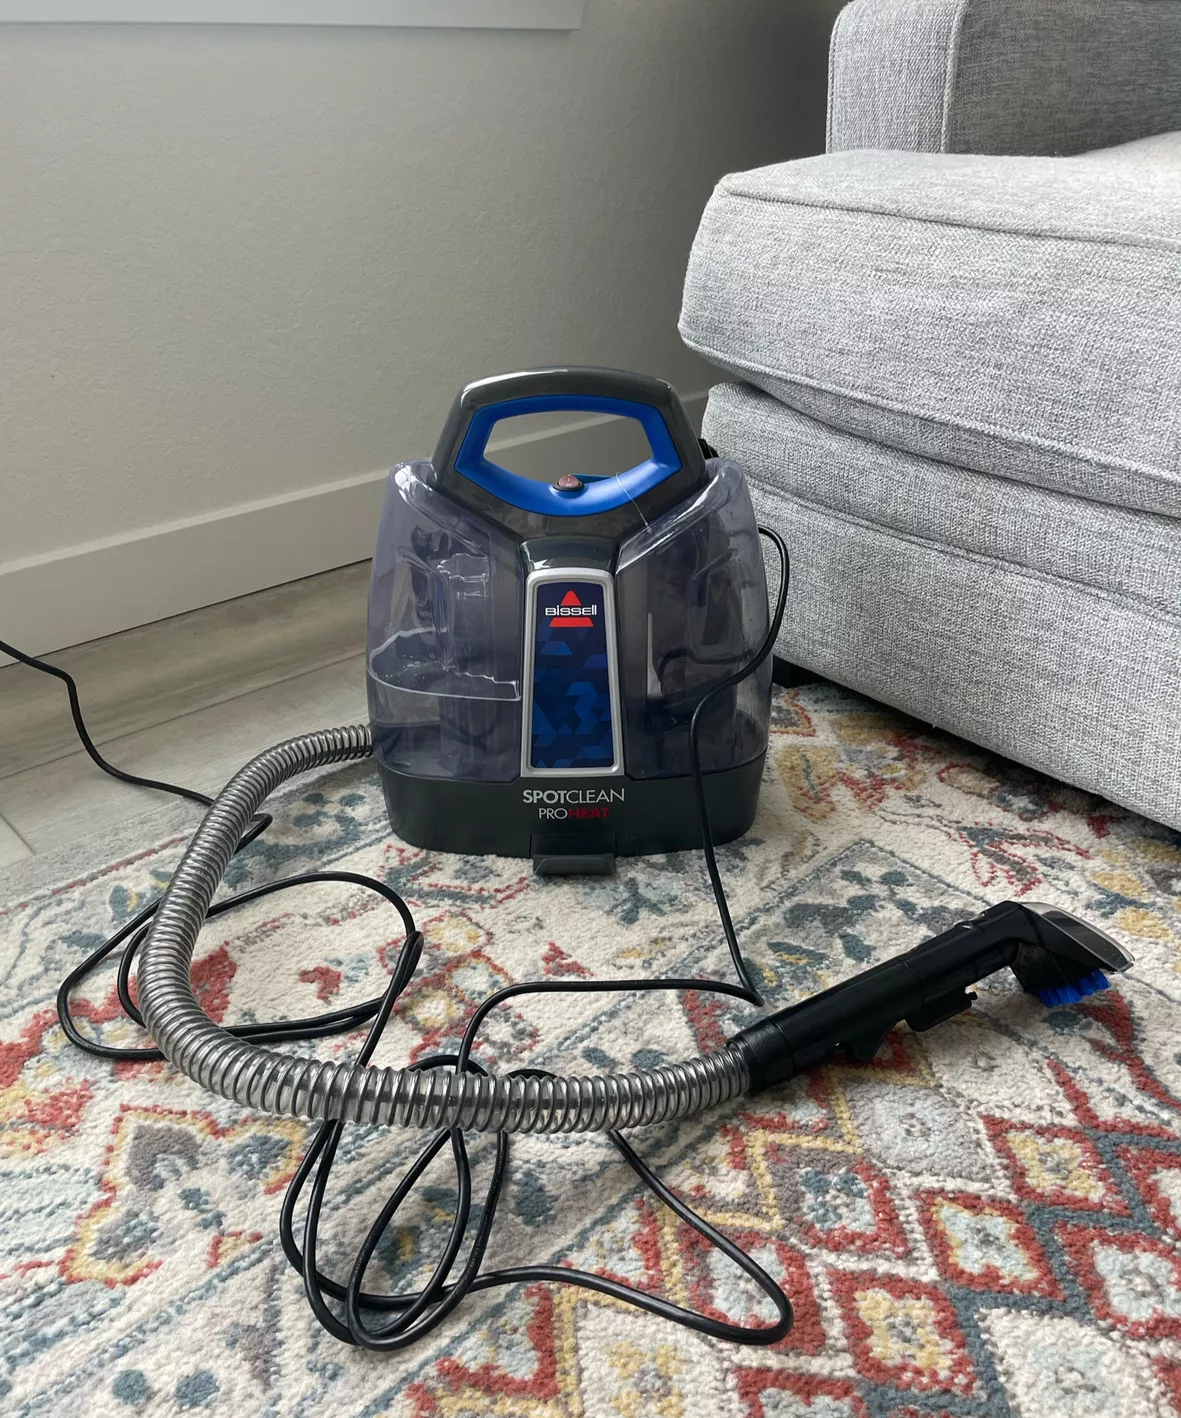 Best carpet cleaner deal: $30 off Bissel's SpotClean ProHeat